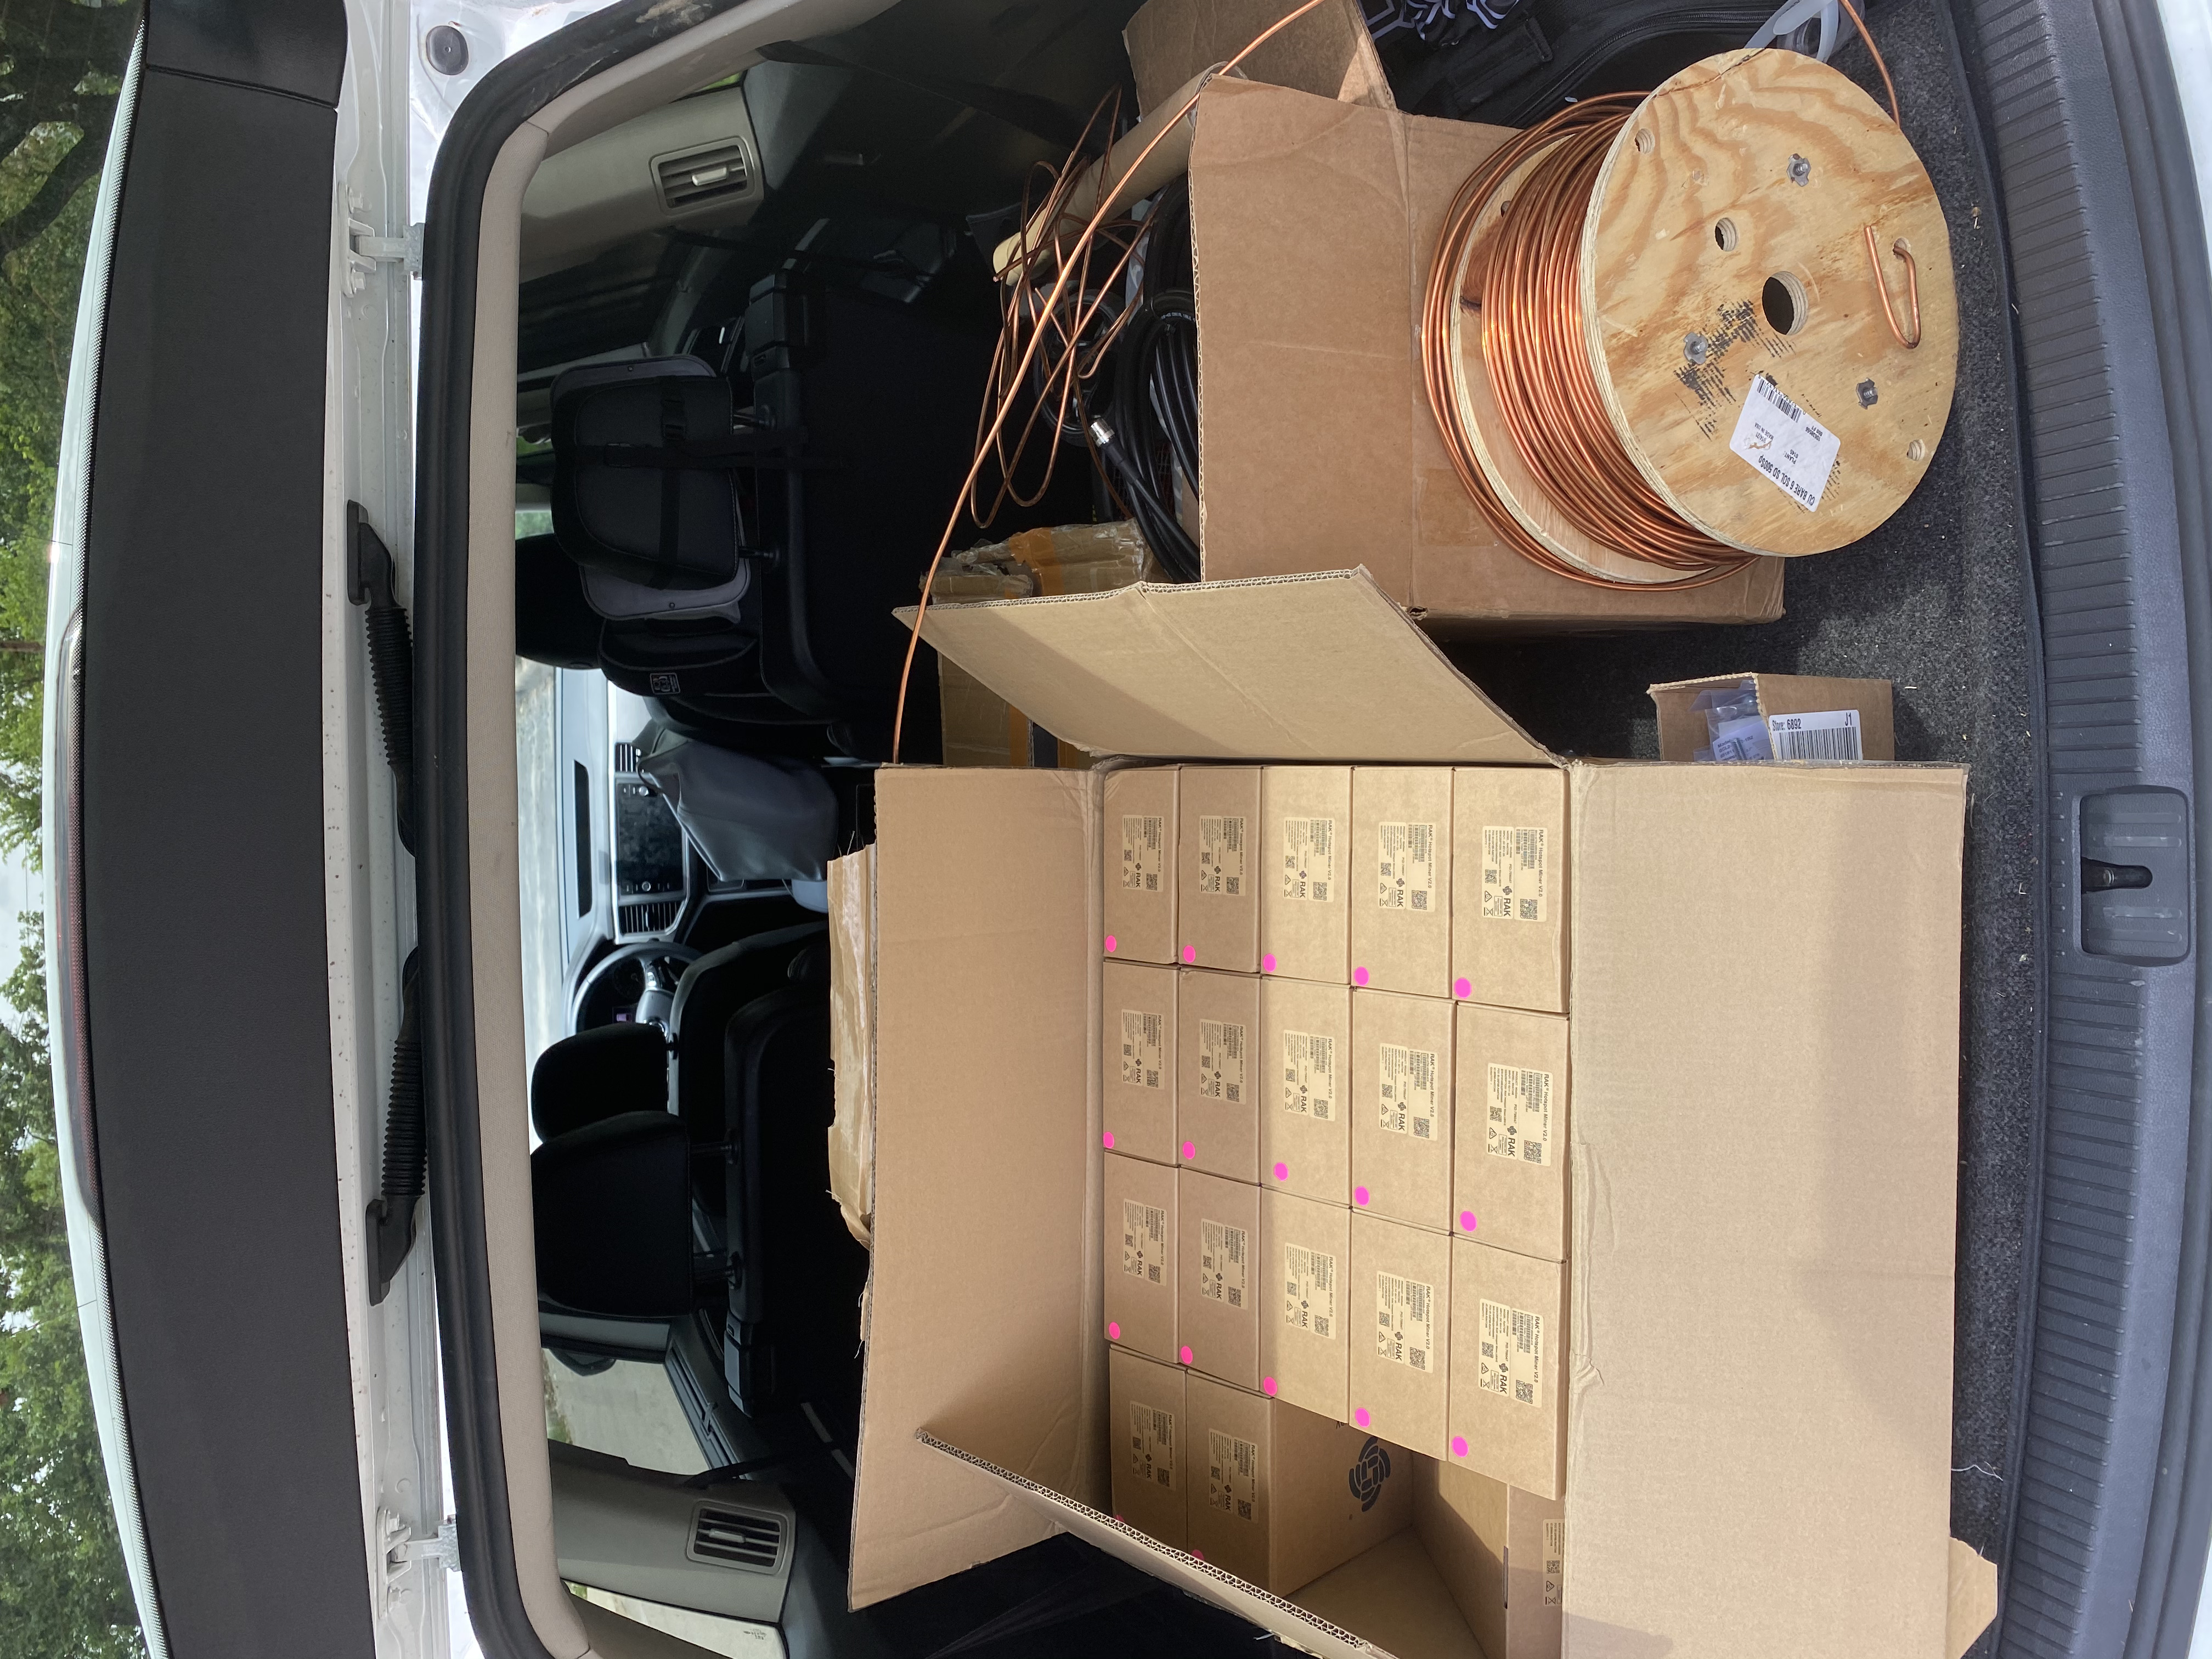 A car full of little boxes, cables, and a spool of copper wire